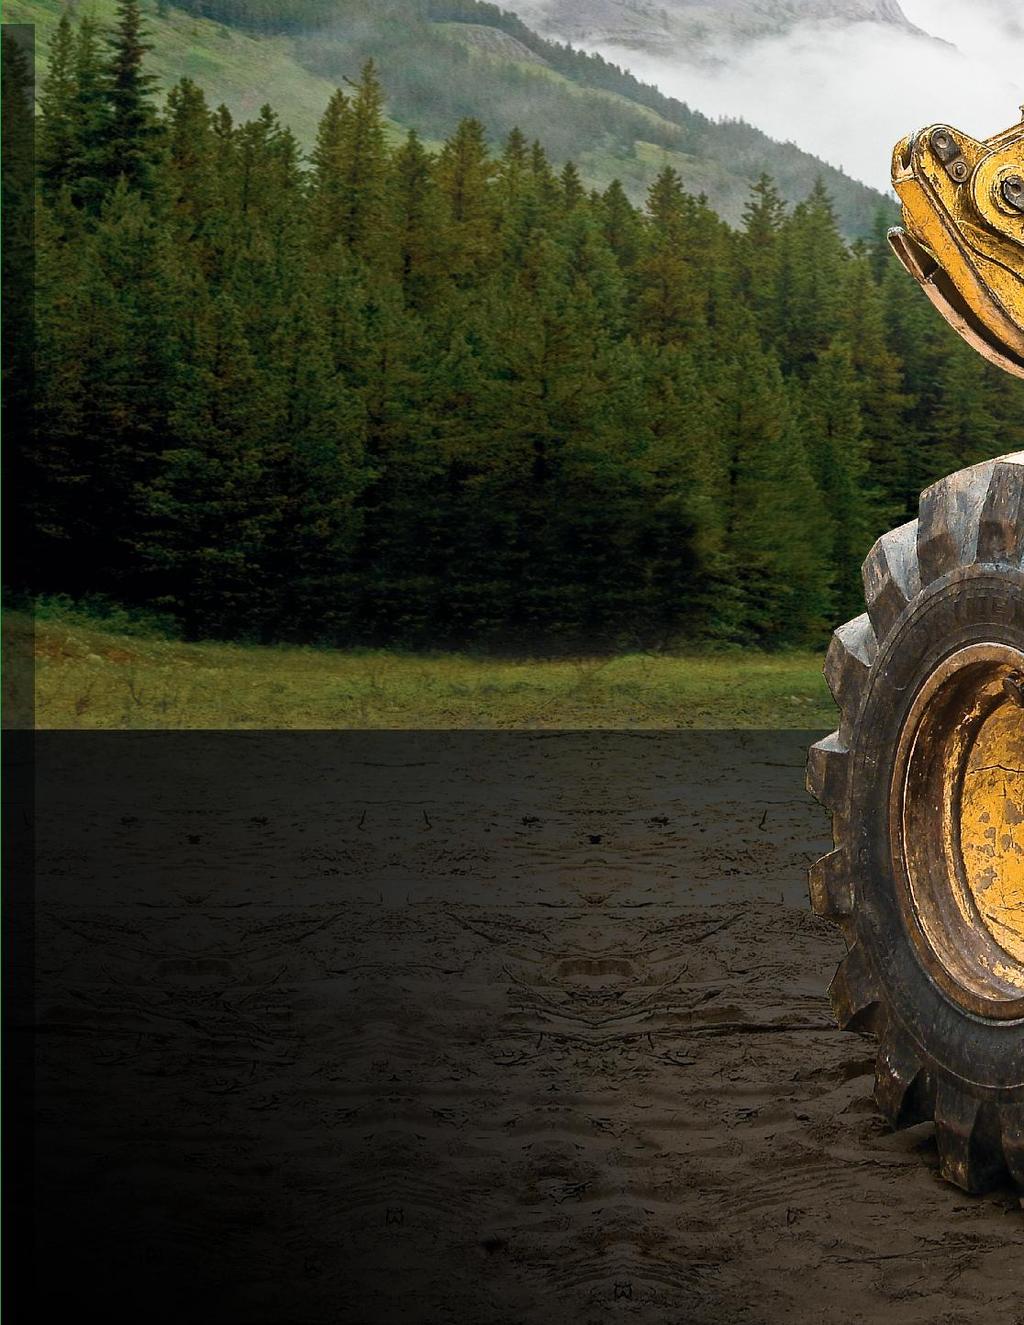 FORESTRY TIRES The Primex LogStomper TM tires feature the latest tire technology including proprietary SteelFlex construction.